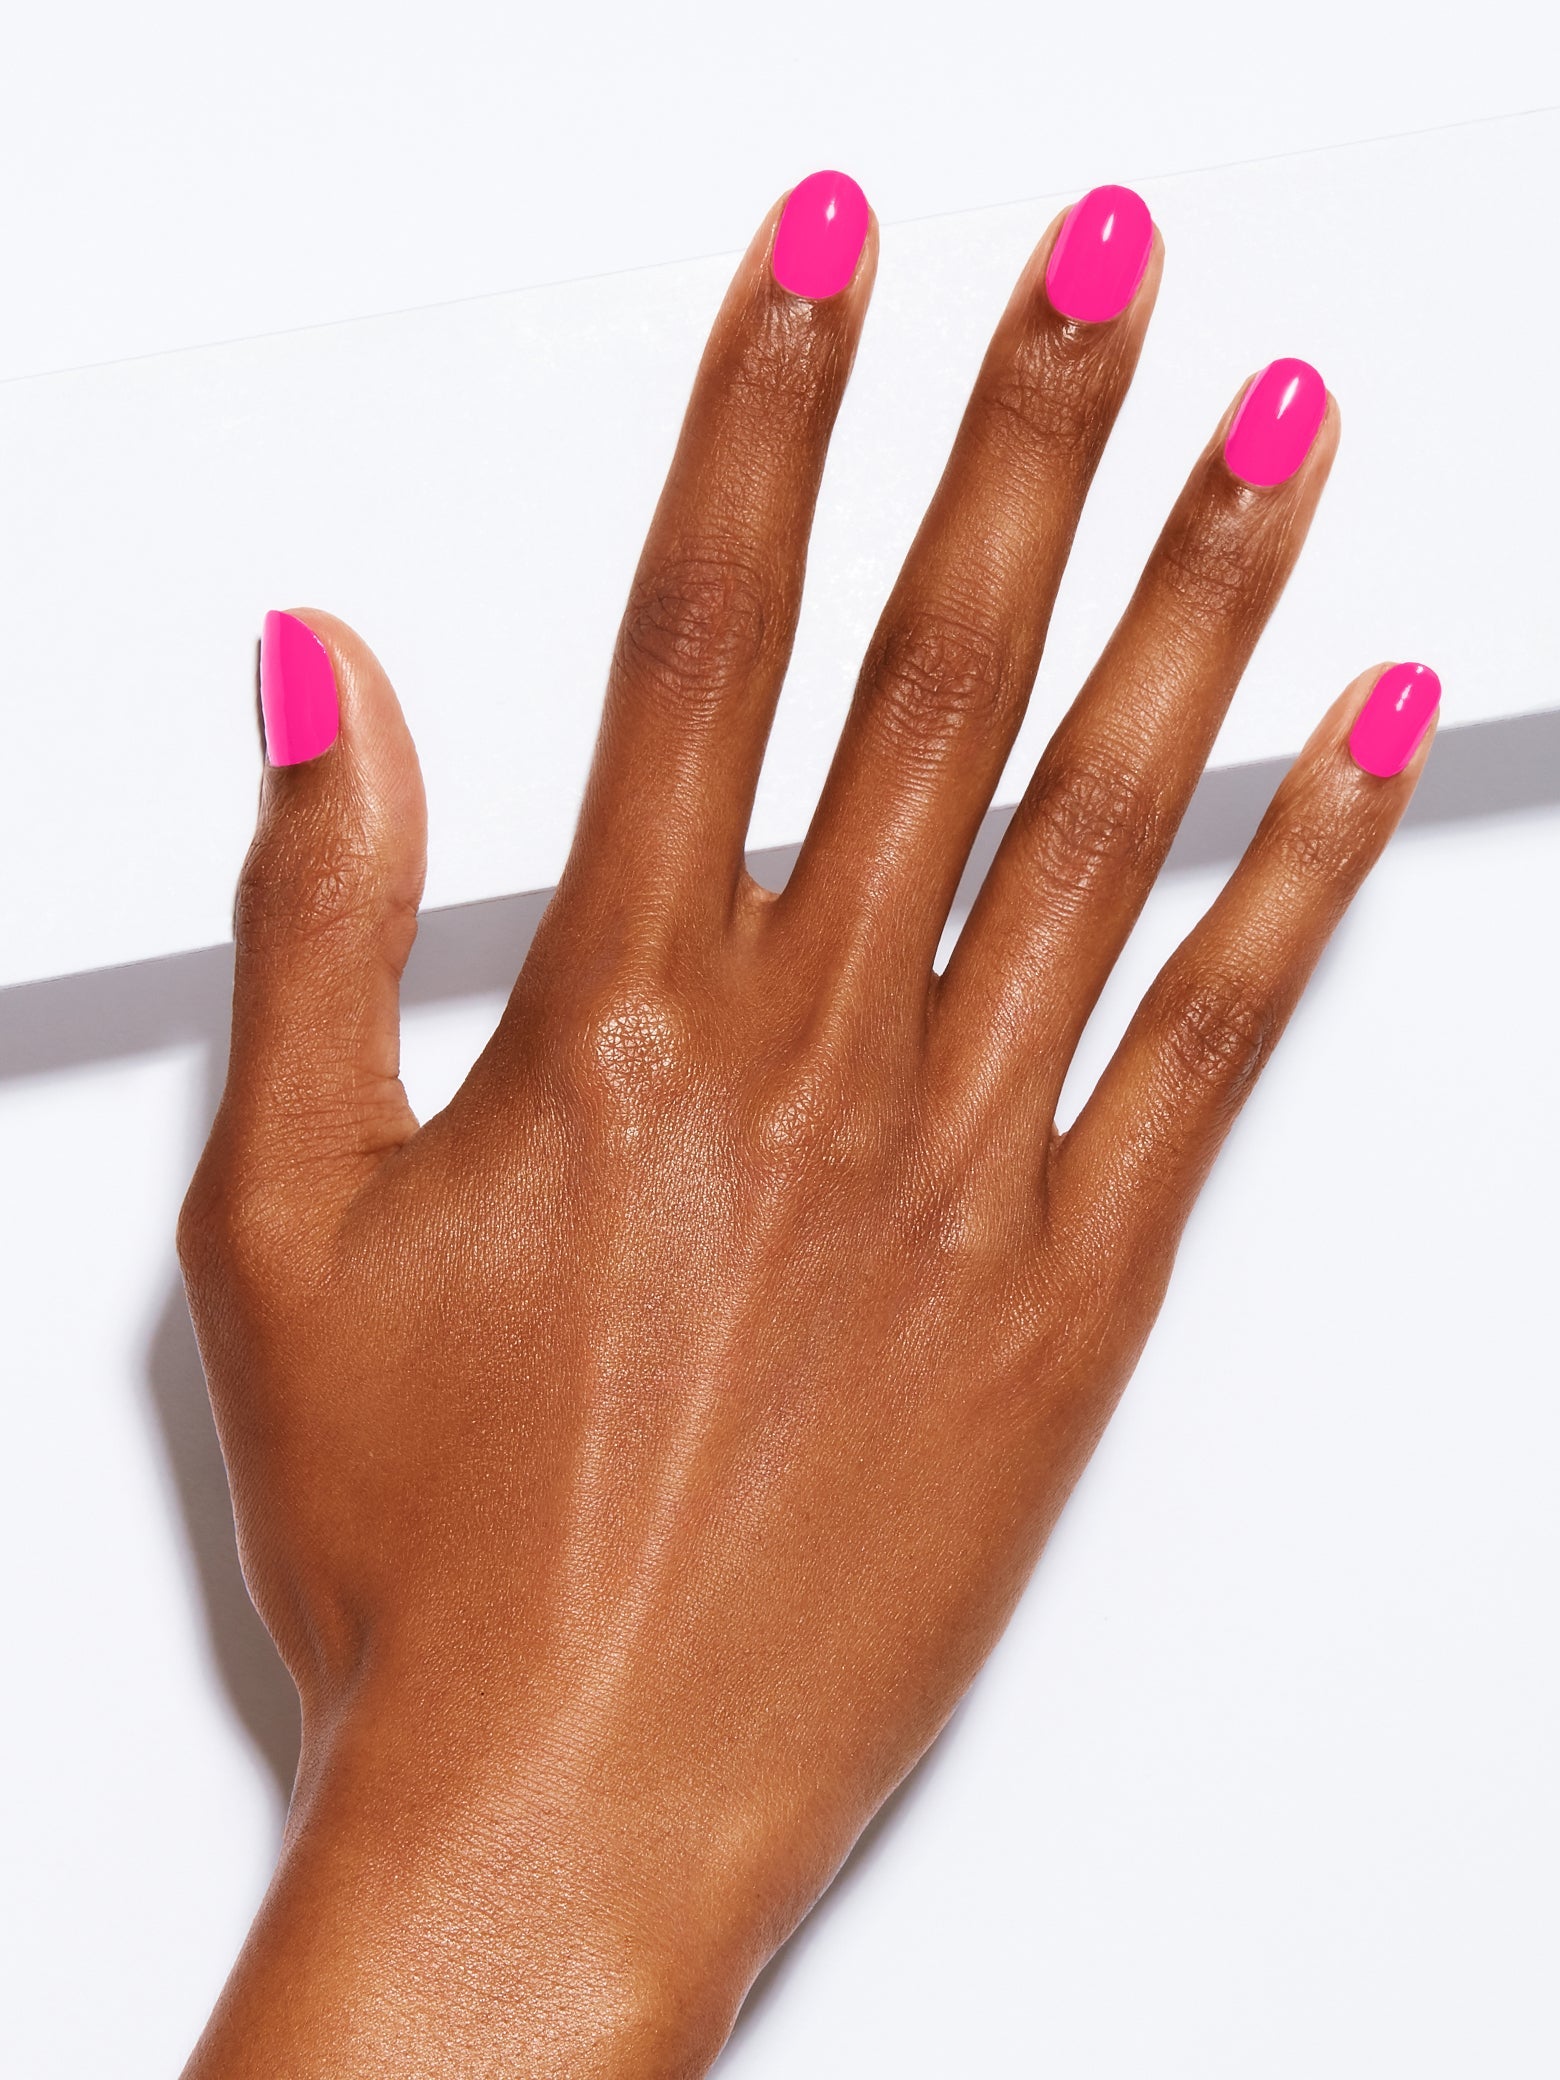 Full bodied neon pink, Full coverage, Rich